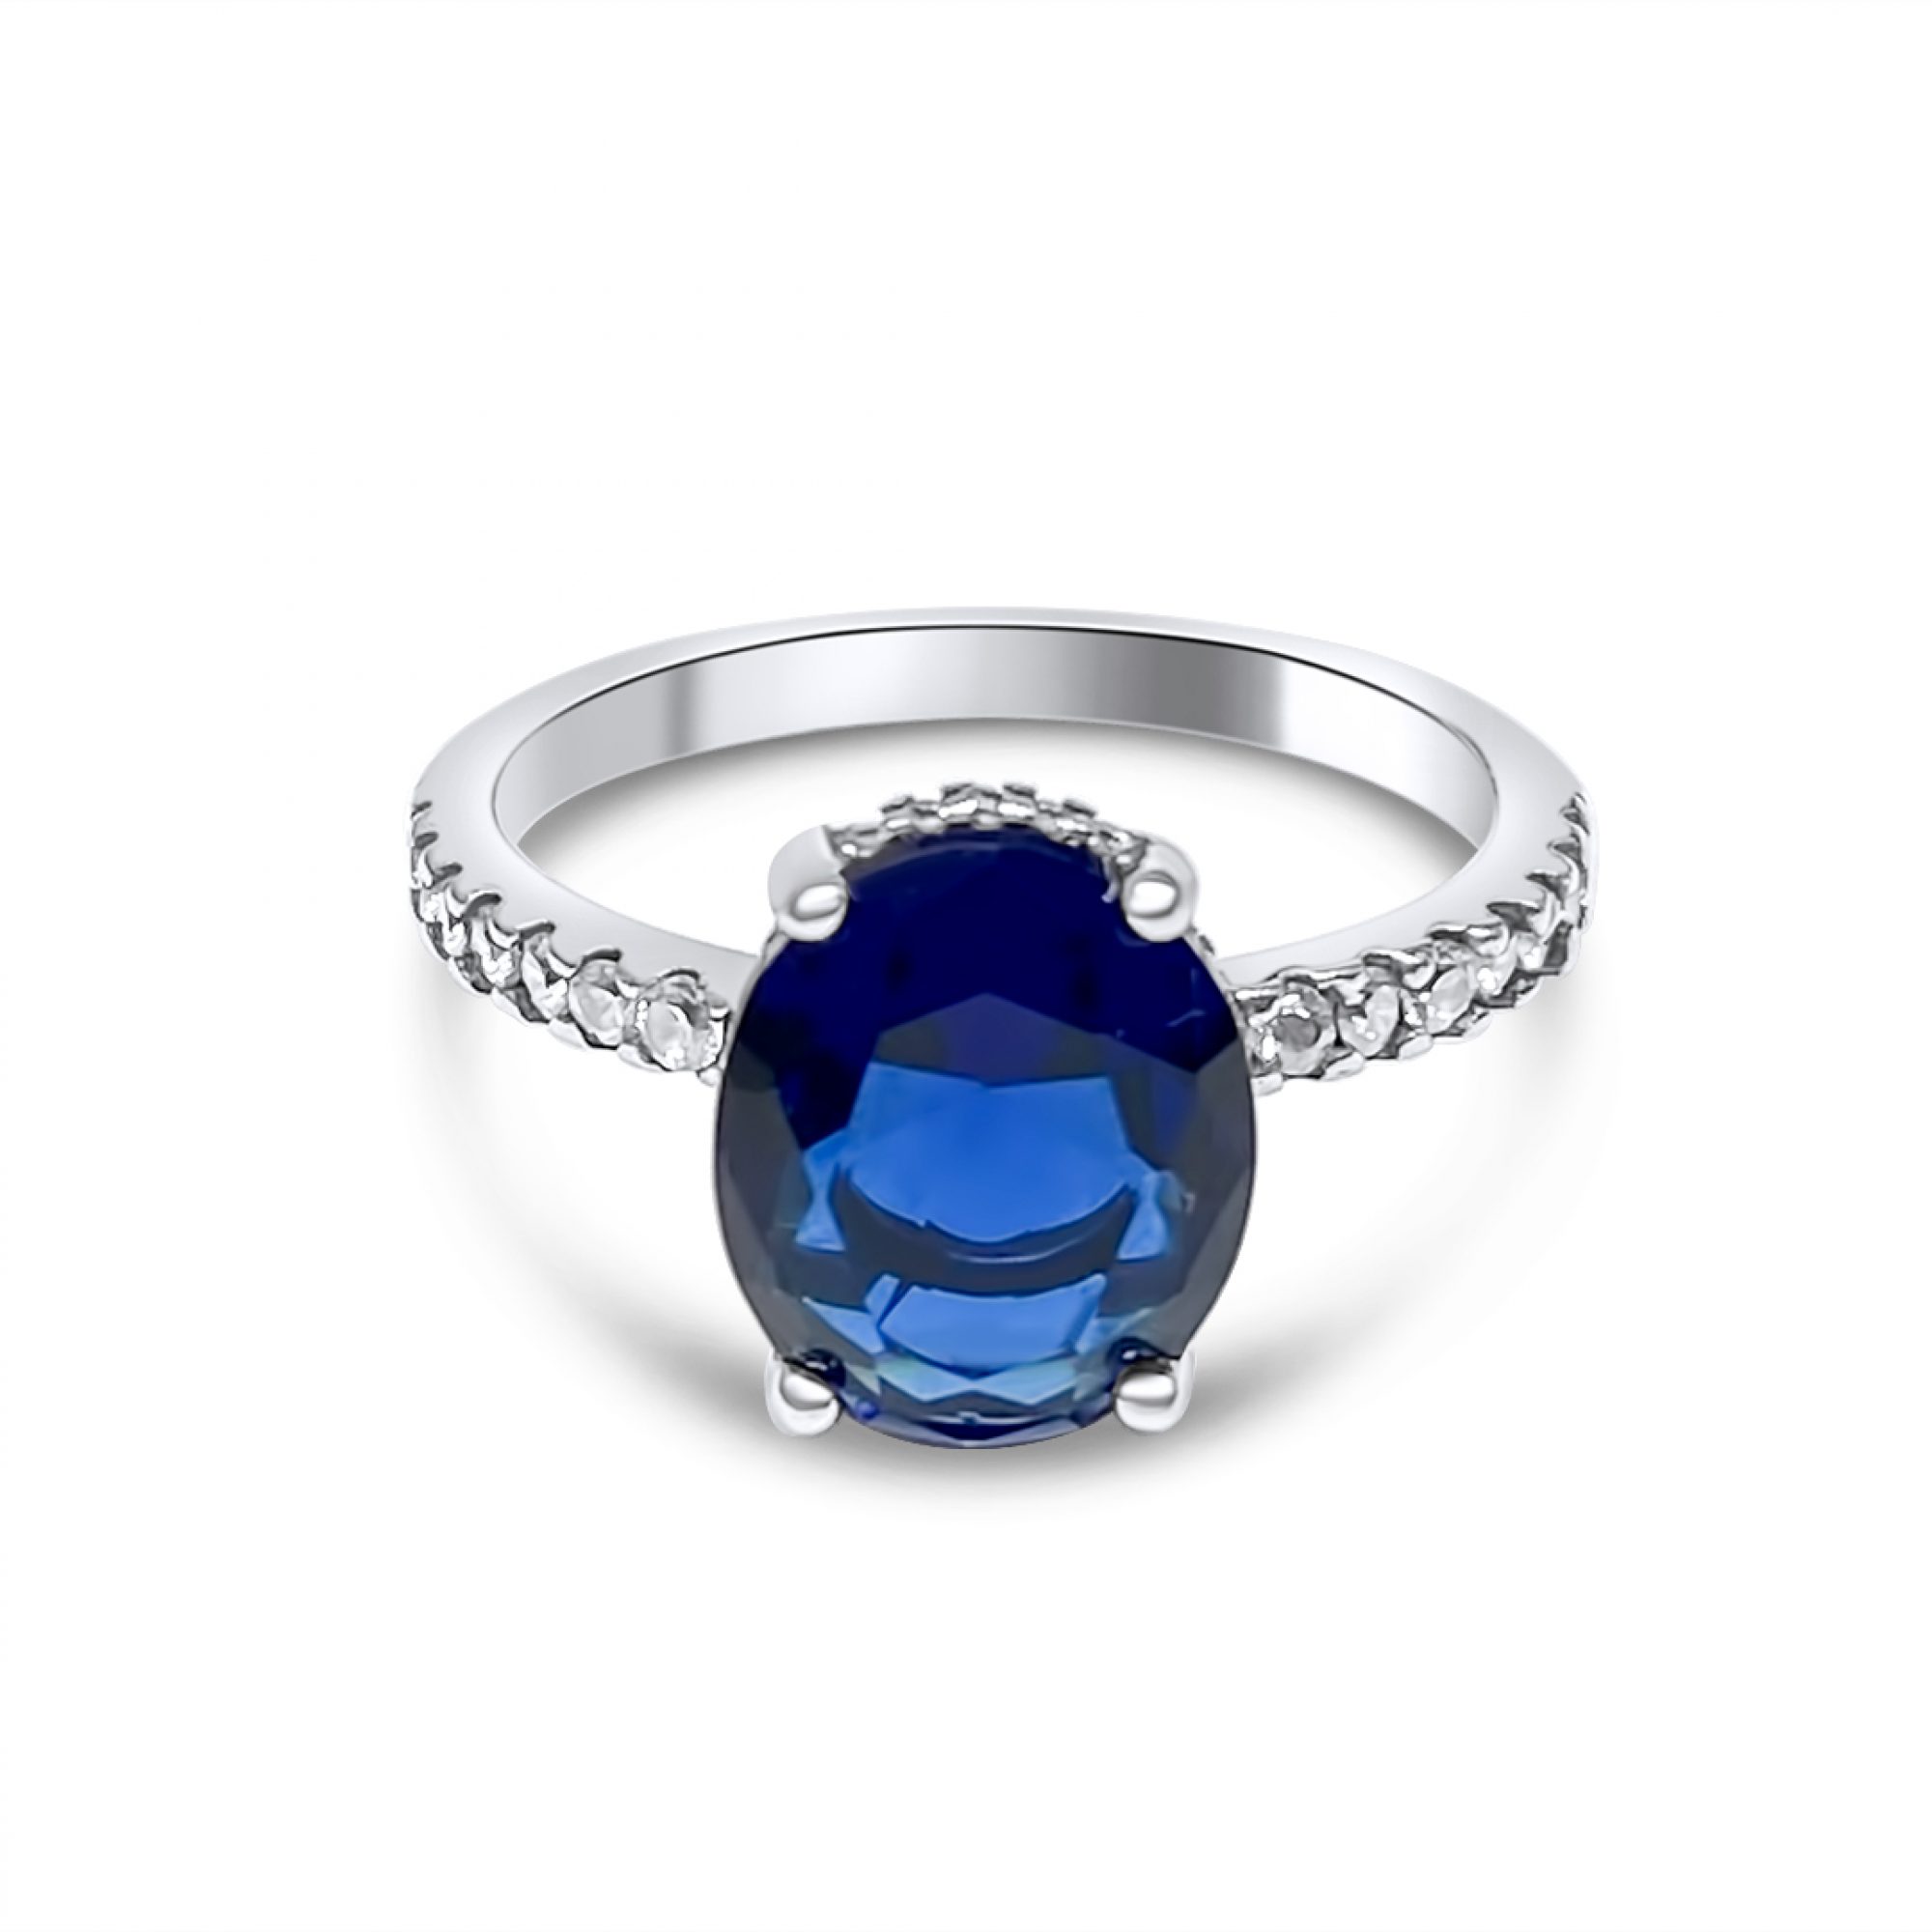 Ring with sapphire and zircon stones